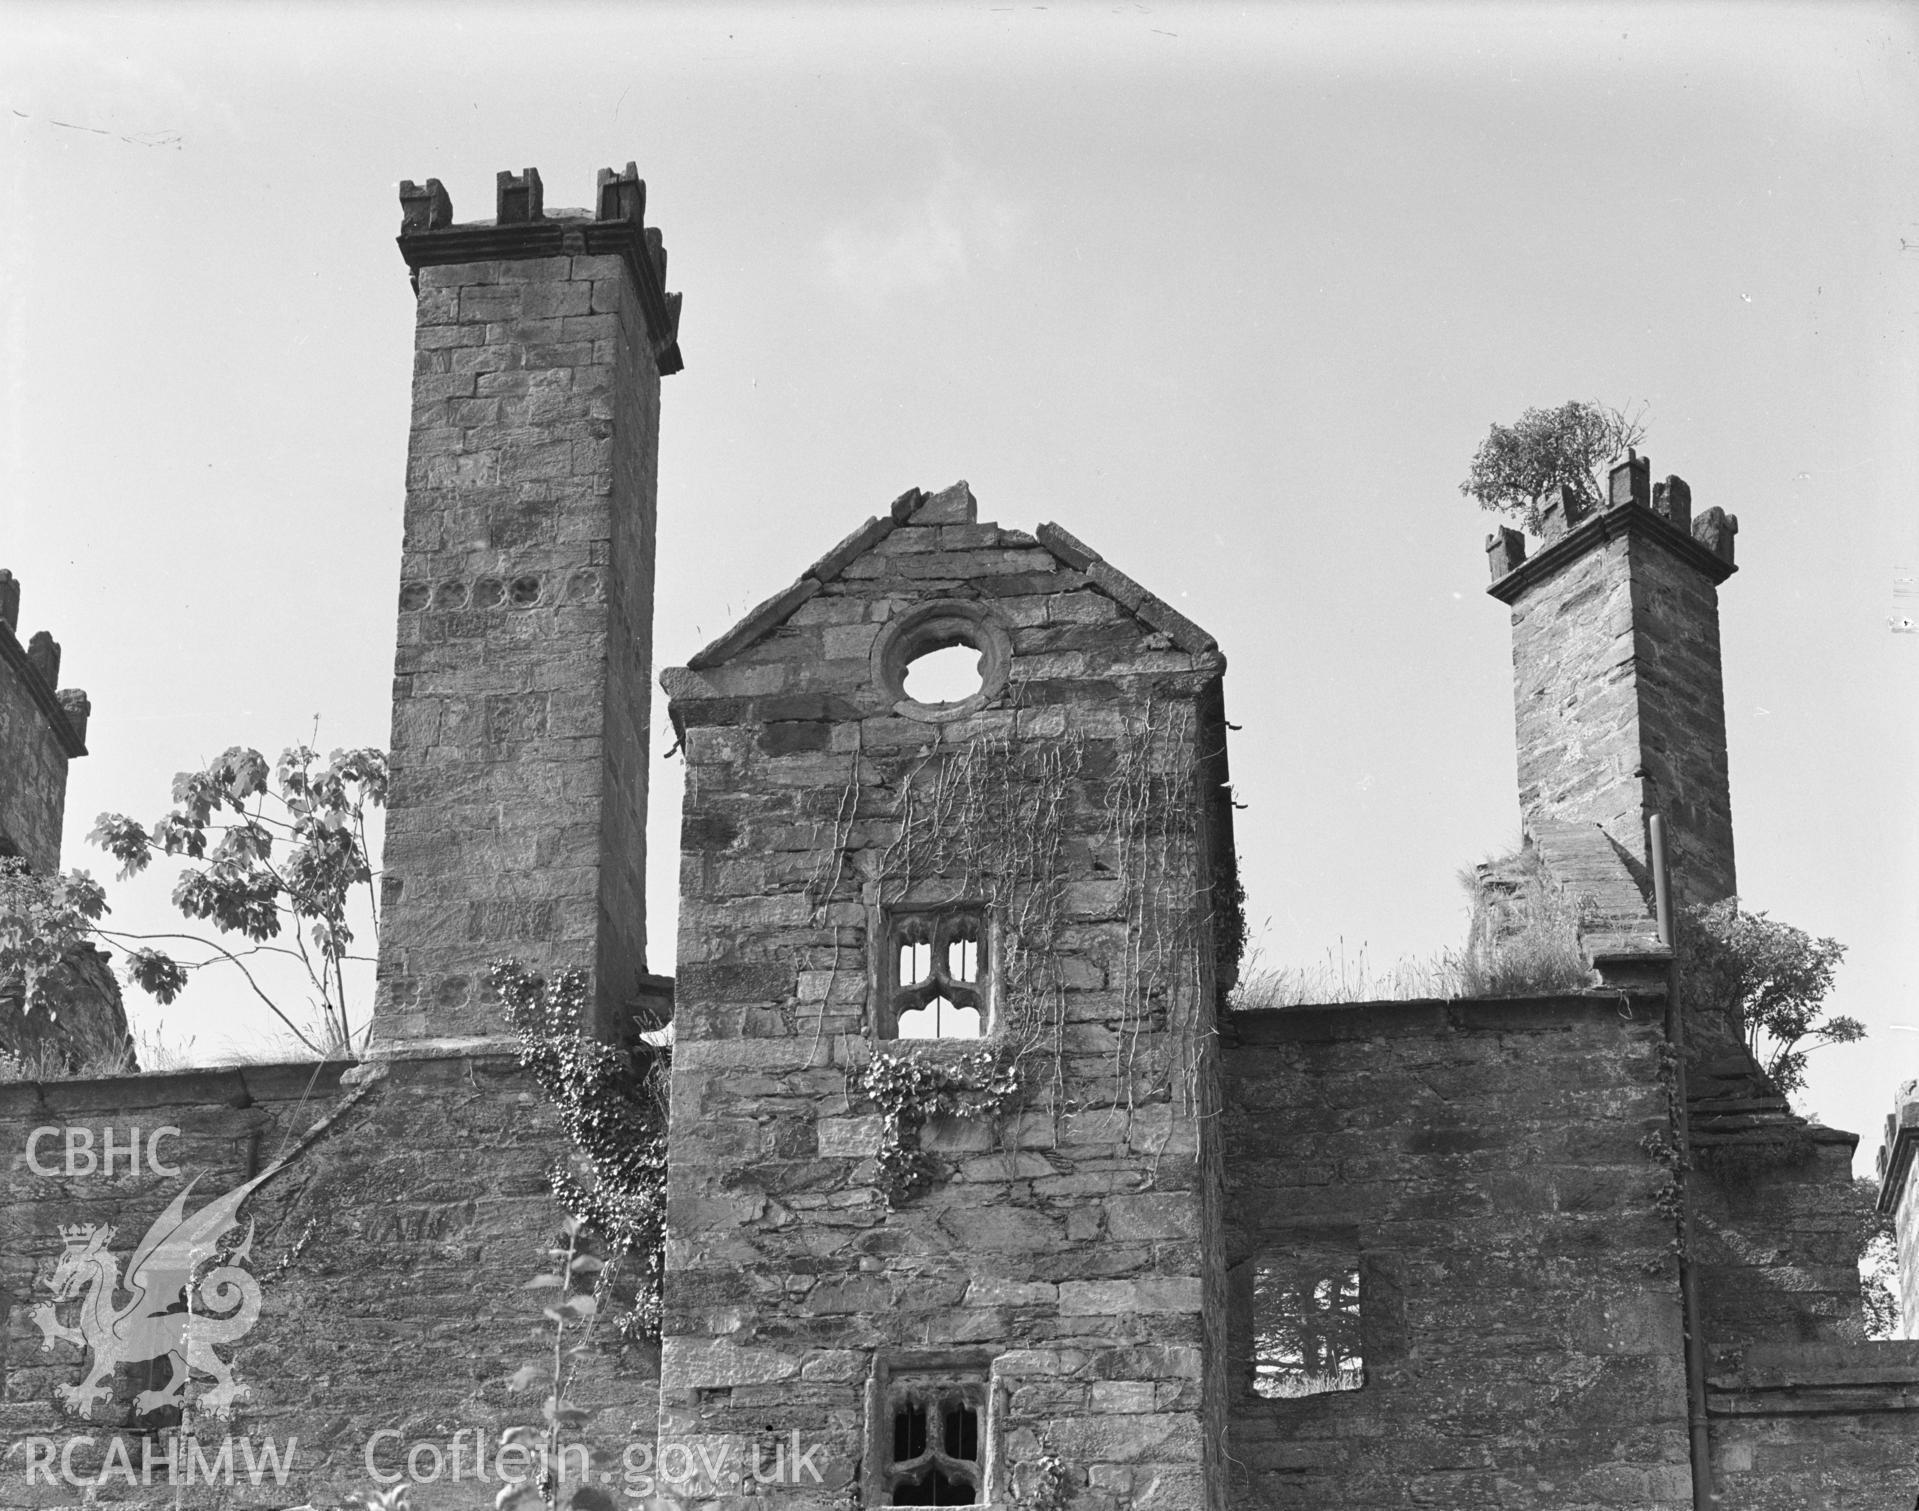 View of the north elevation showing the quatrefoil courses on the chimneys.